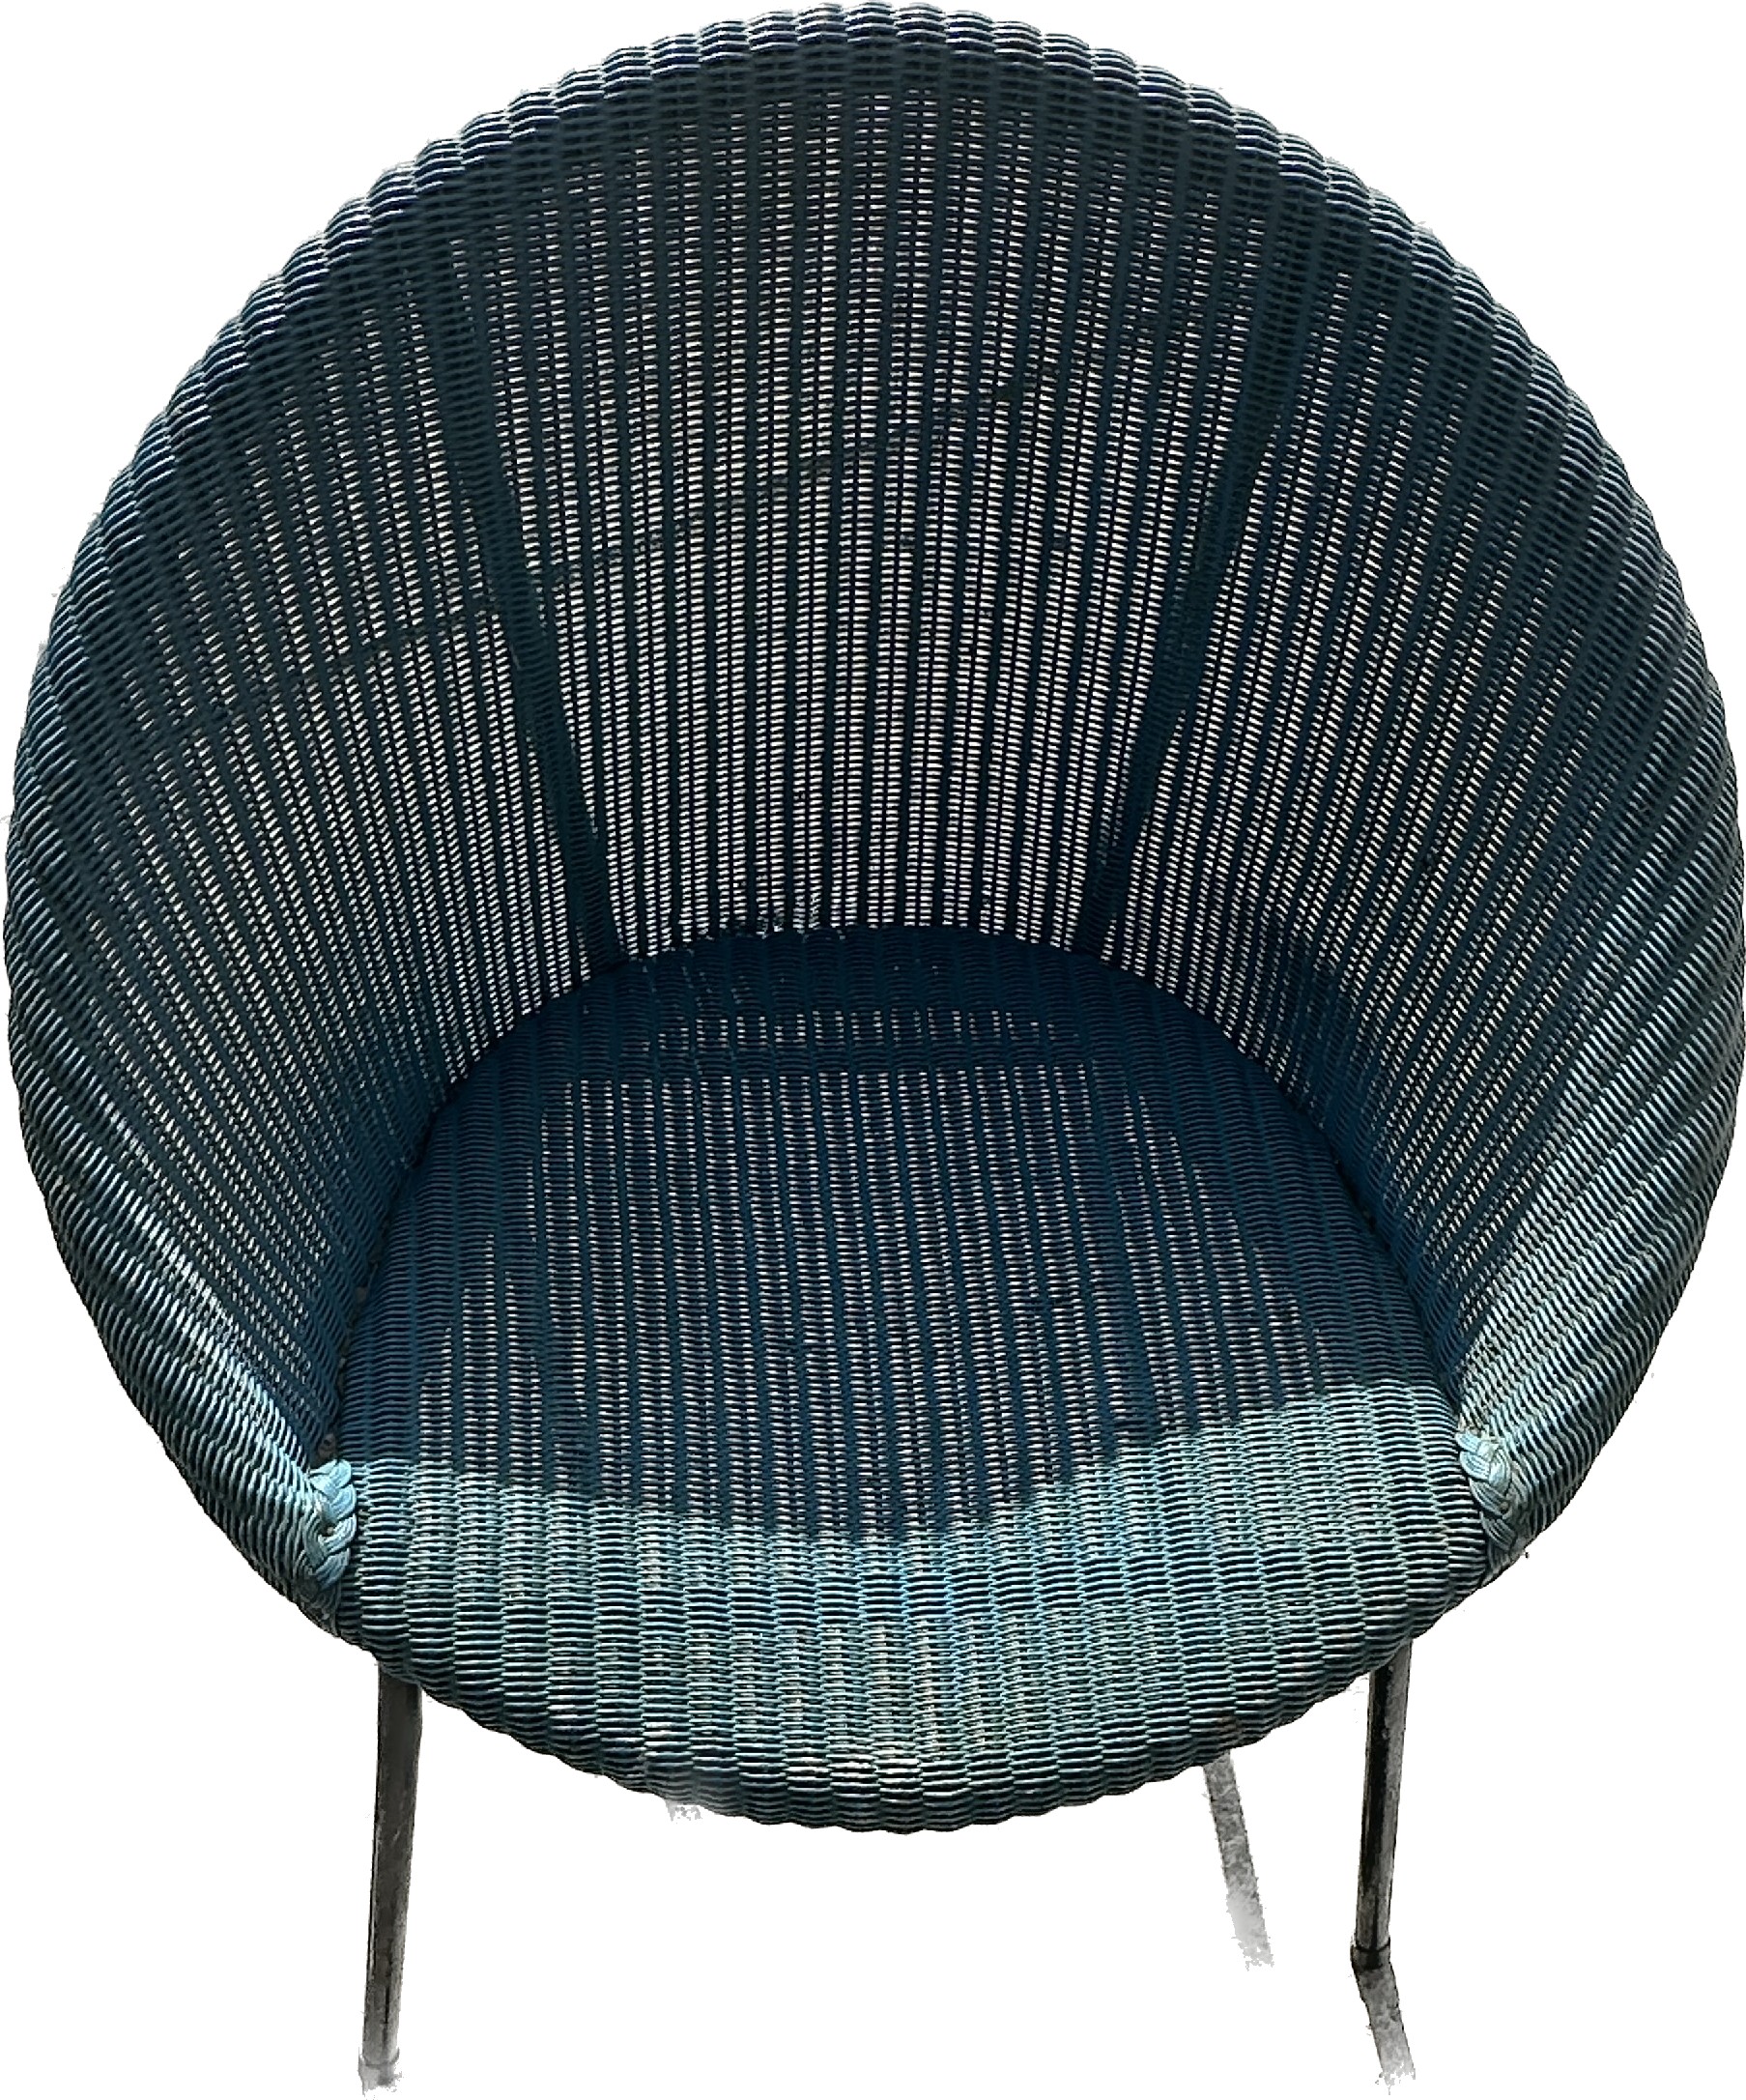 1950's/60's Llyold loom chair ' Lusty'